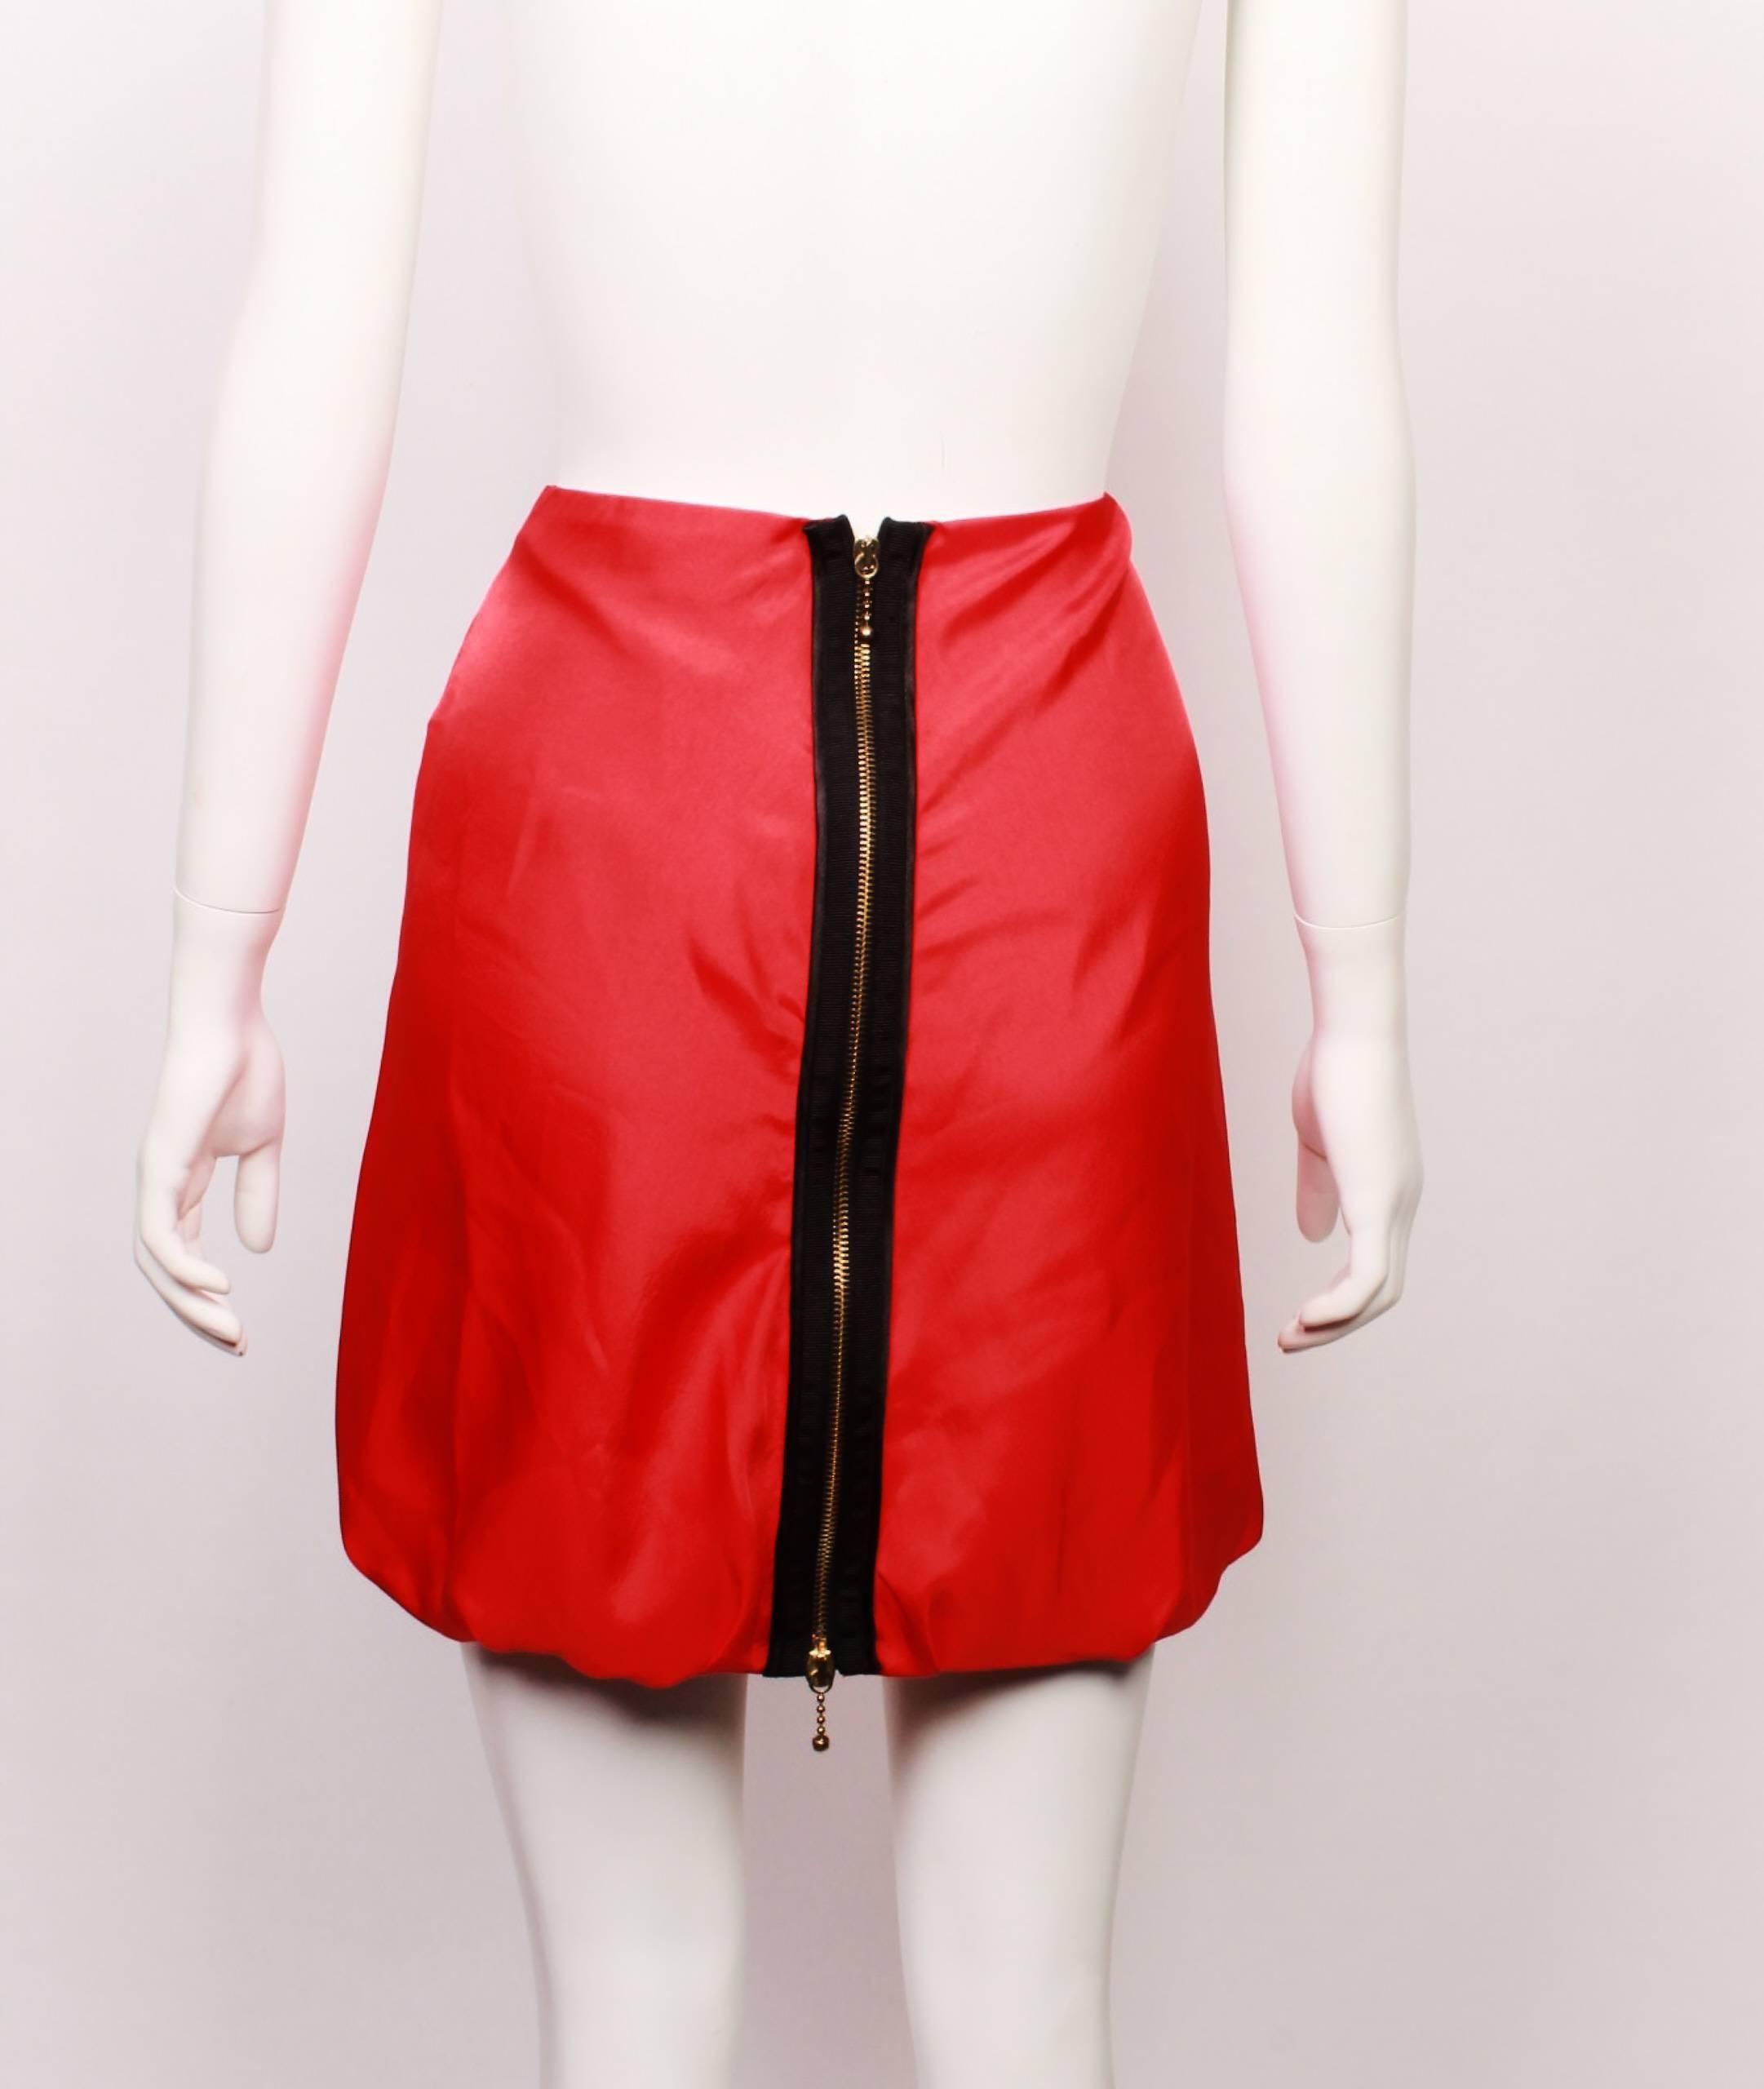 Alexander Mc Queen red satin mini bubble skirt with black and metal back zip feature. Fully lined. 
Original Tag attached.
Made in Italy. Size 40.